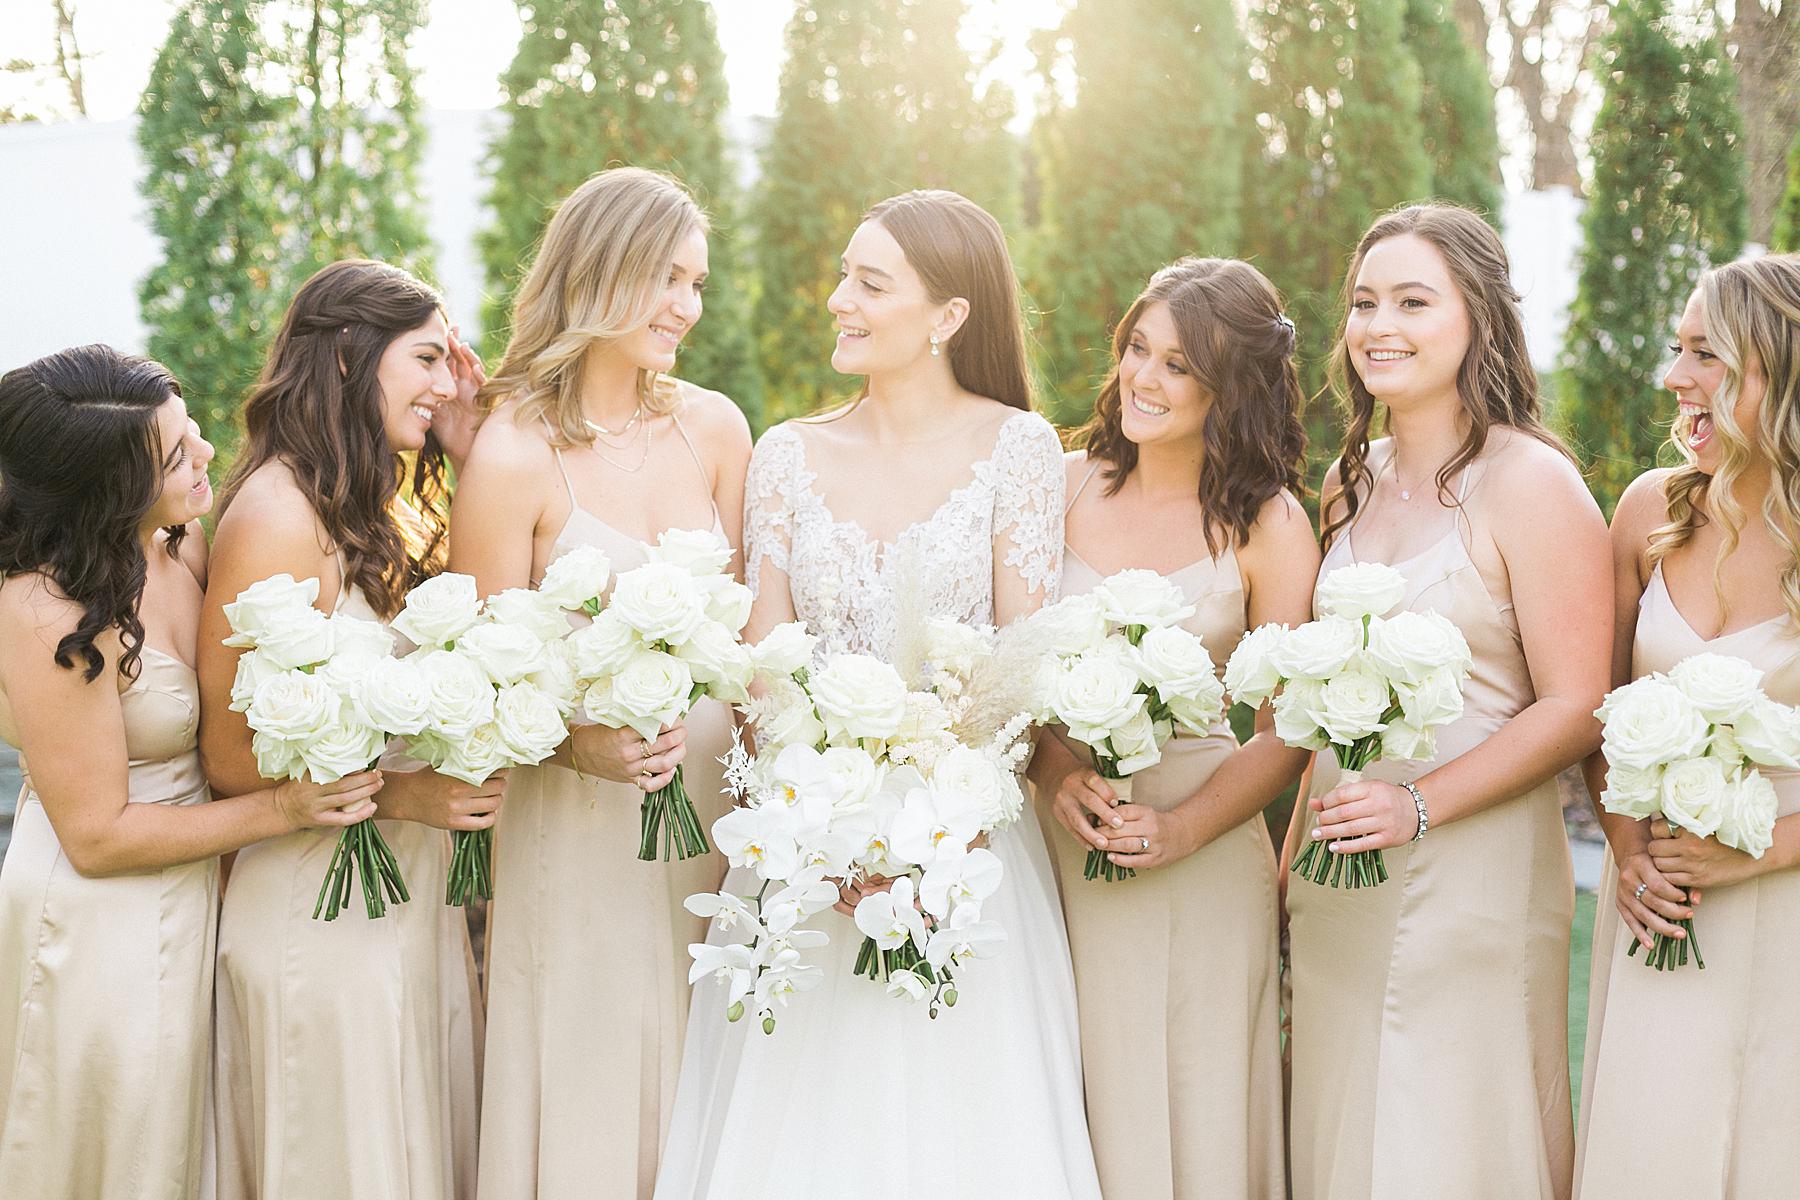 bride in white lace long sleeve gown walking with bridesmaids in nude champagne off-white dresses and white bouquets